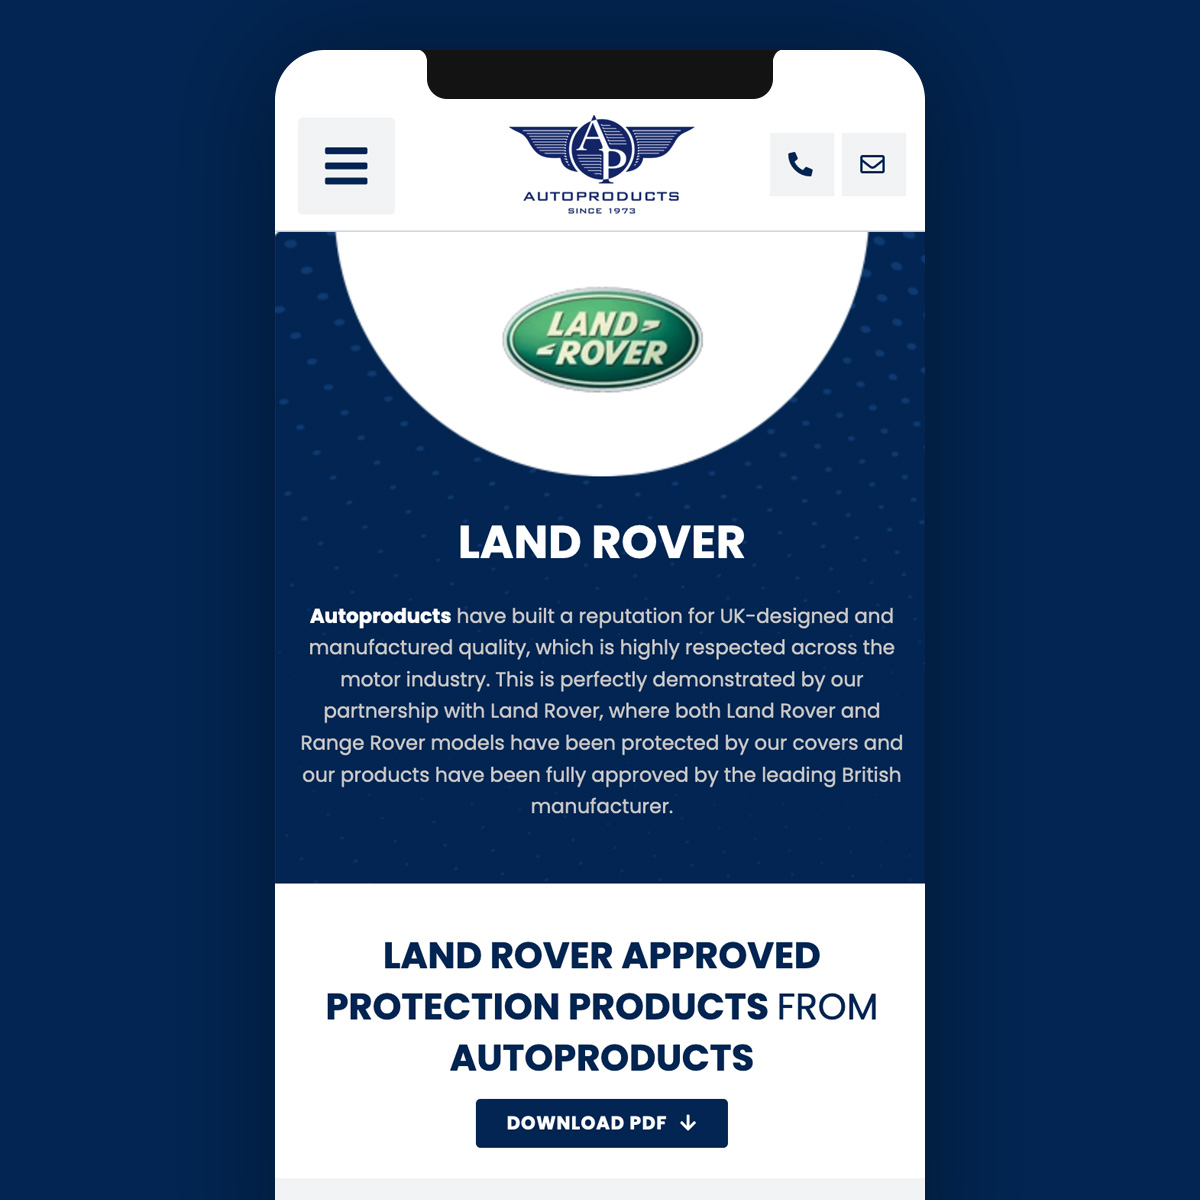 Autoproducts Mobile Land Rover